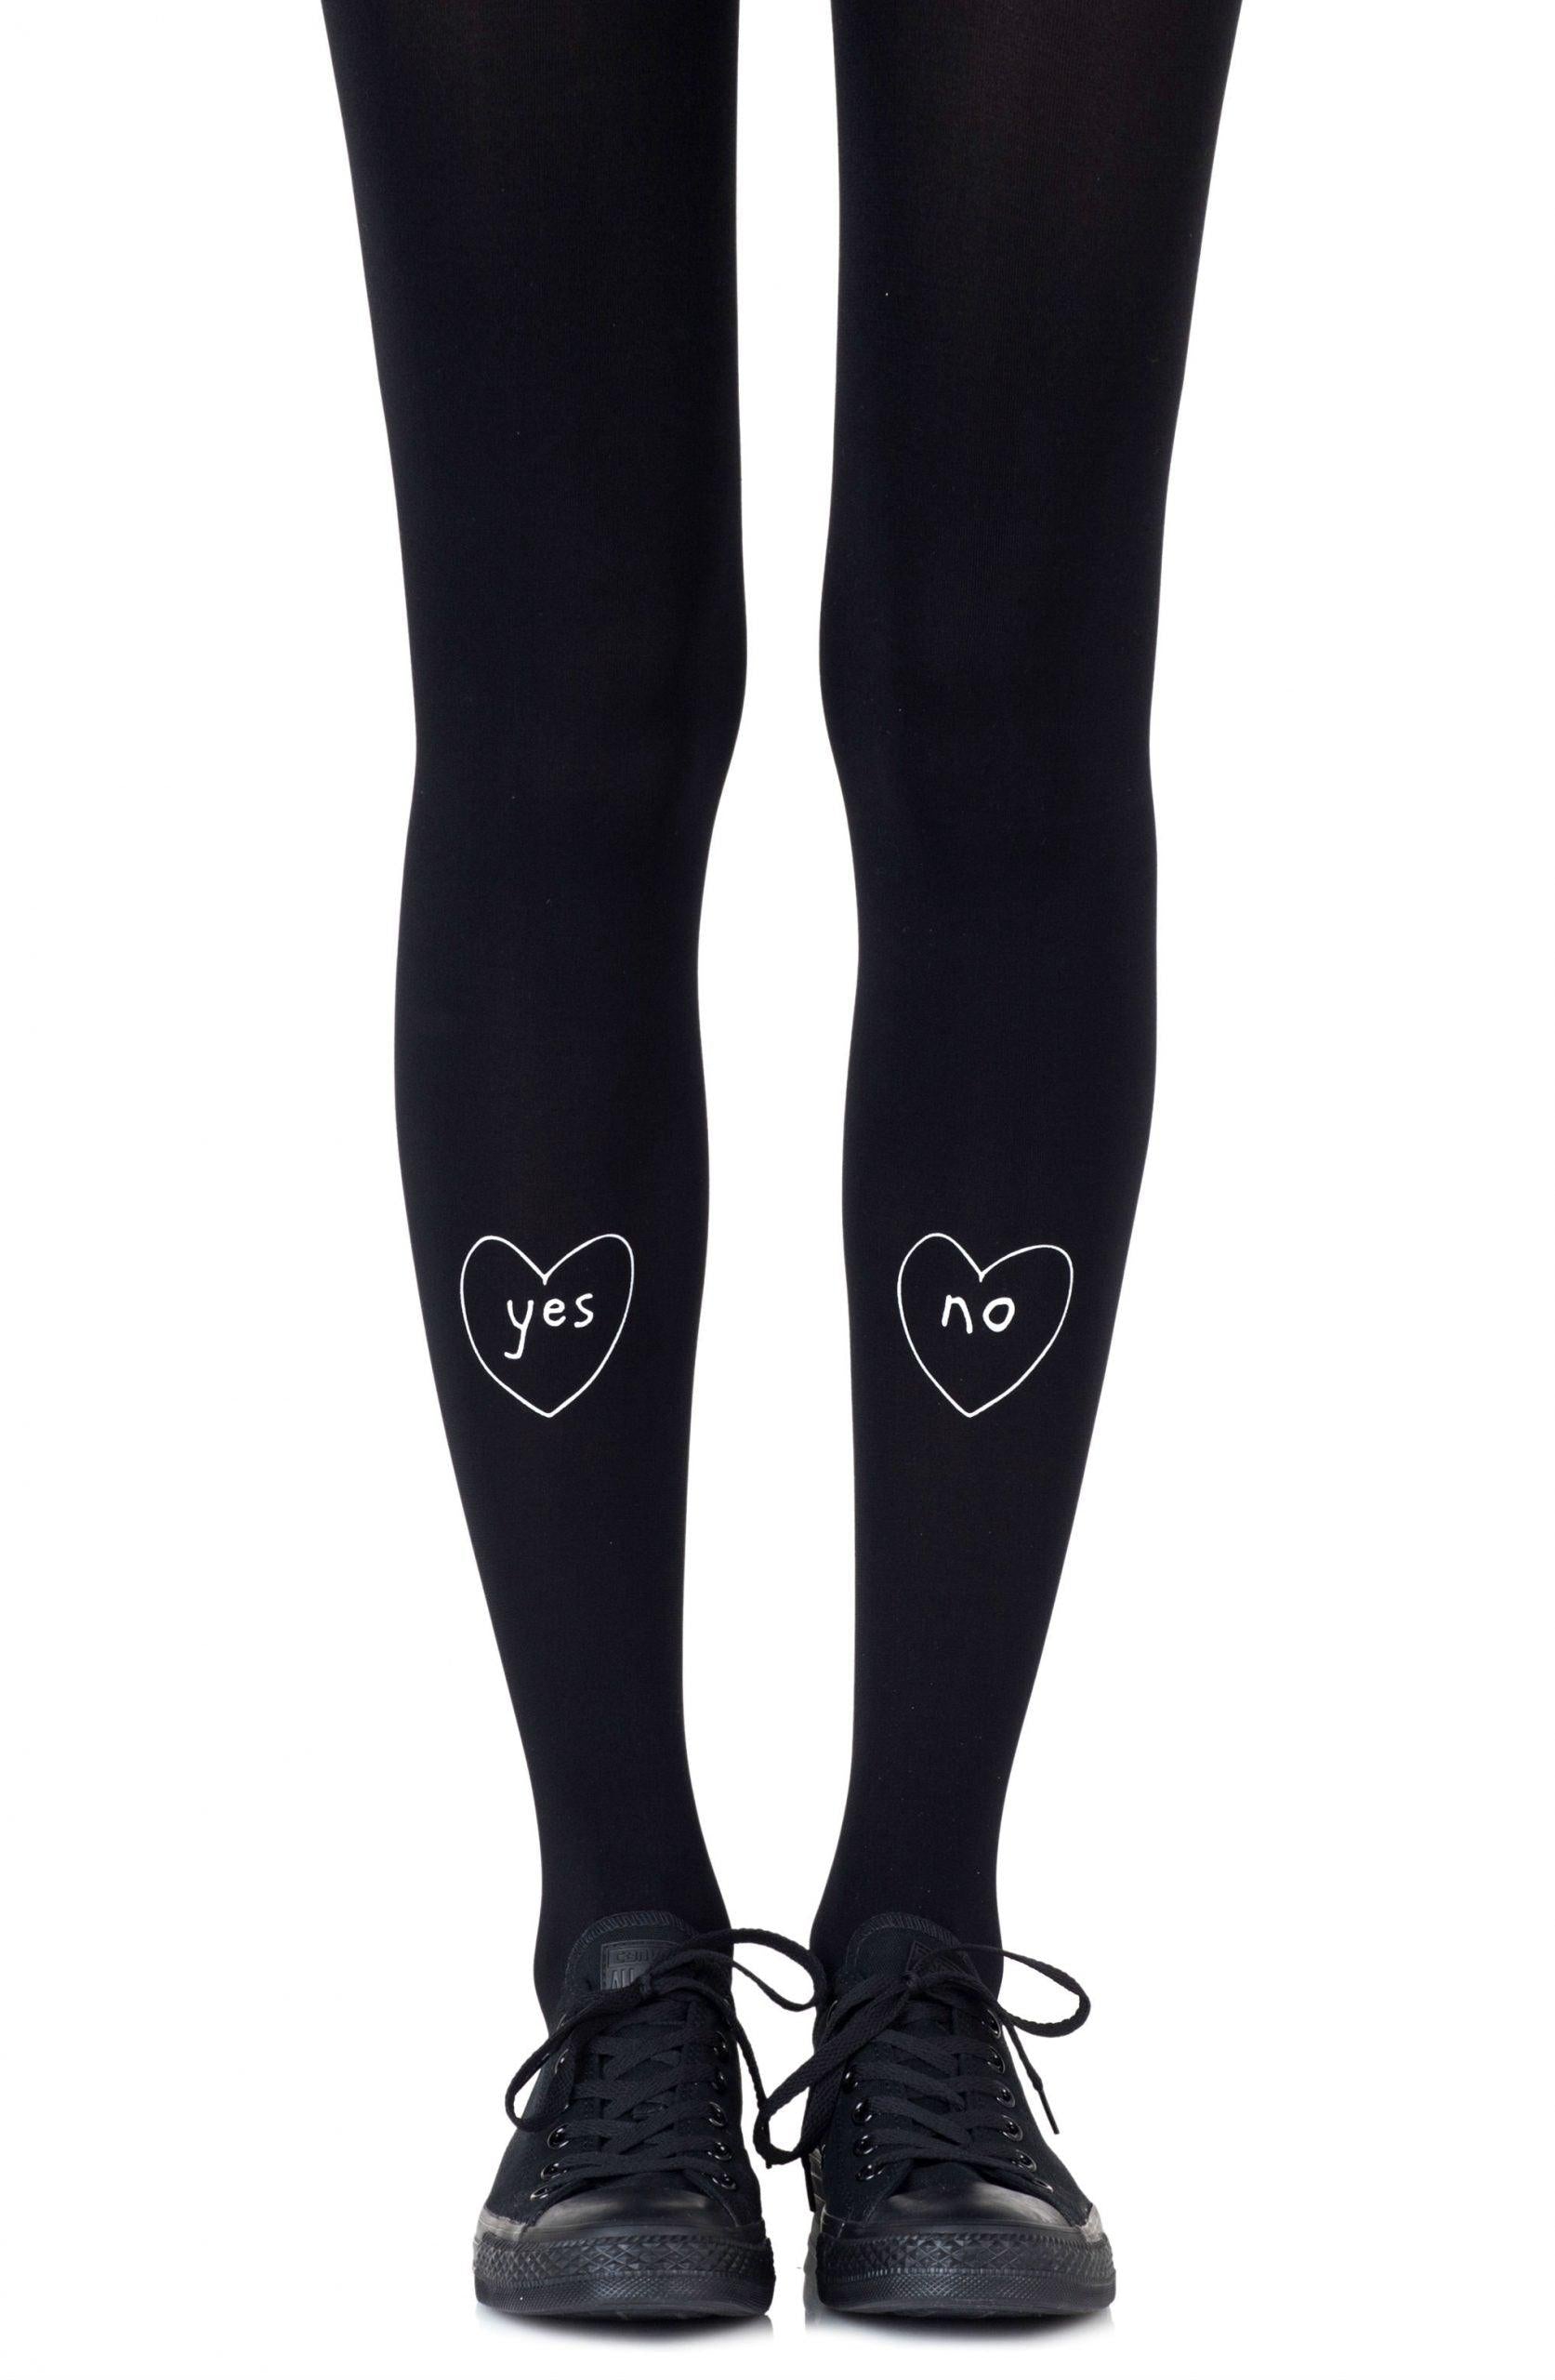 Zohara "So Call Me Maybe" Black Tights - Sydney Rose Lingerie 